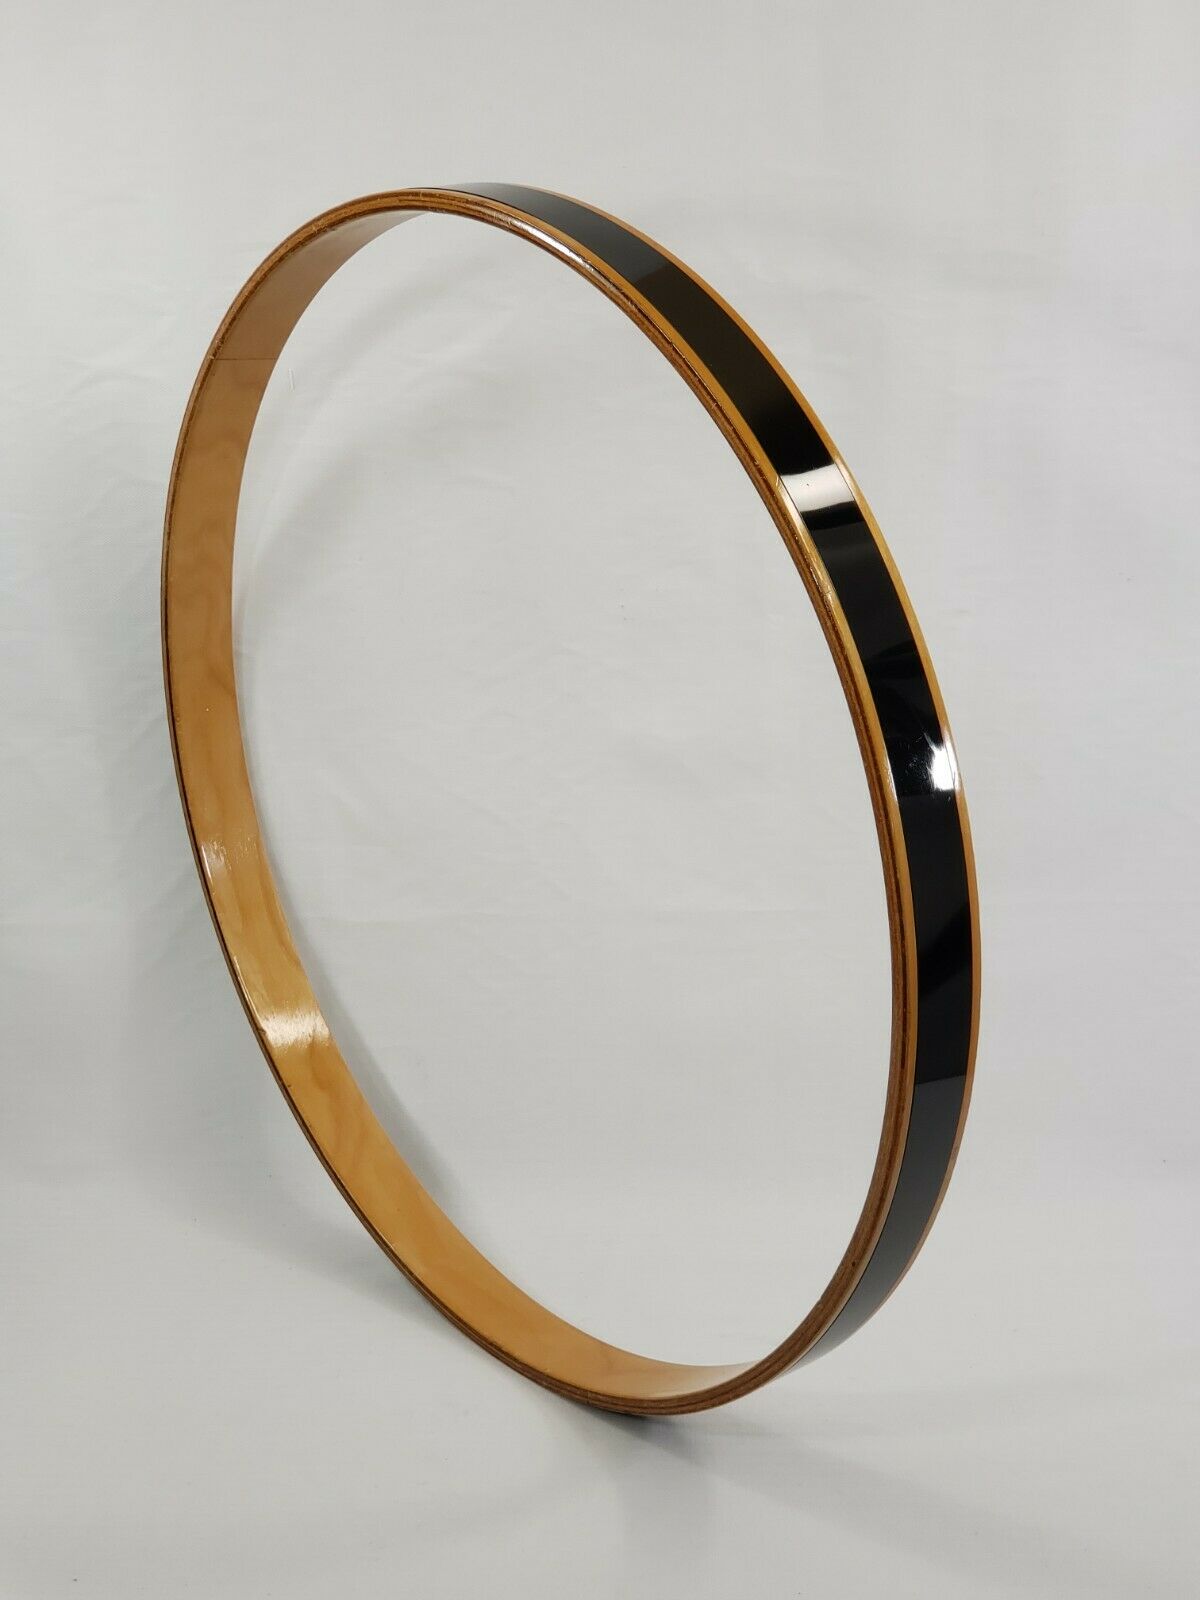 Yamaha Bass Drum Hoop 22" Wood Bass Drum Hoop Lacquer Finish With Black Inlay